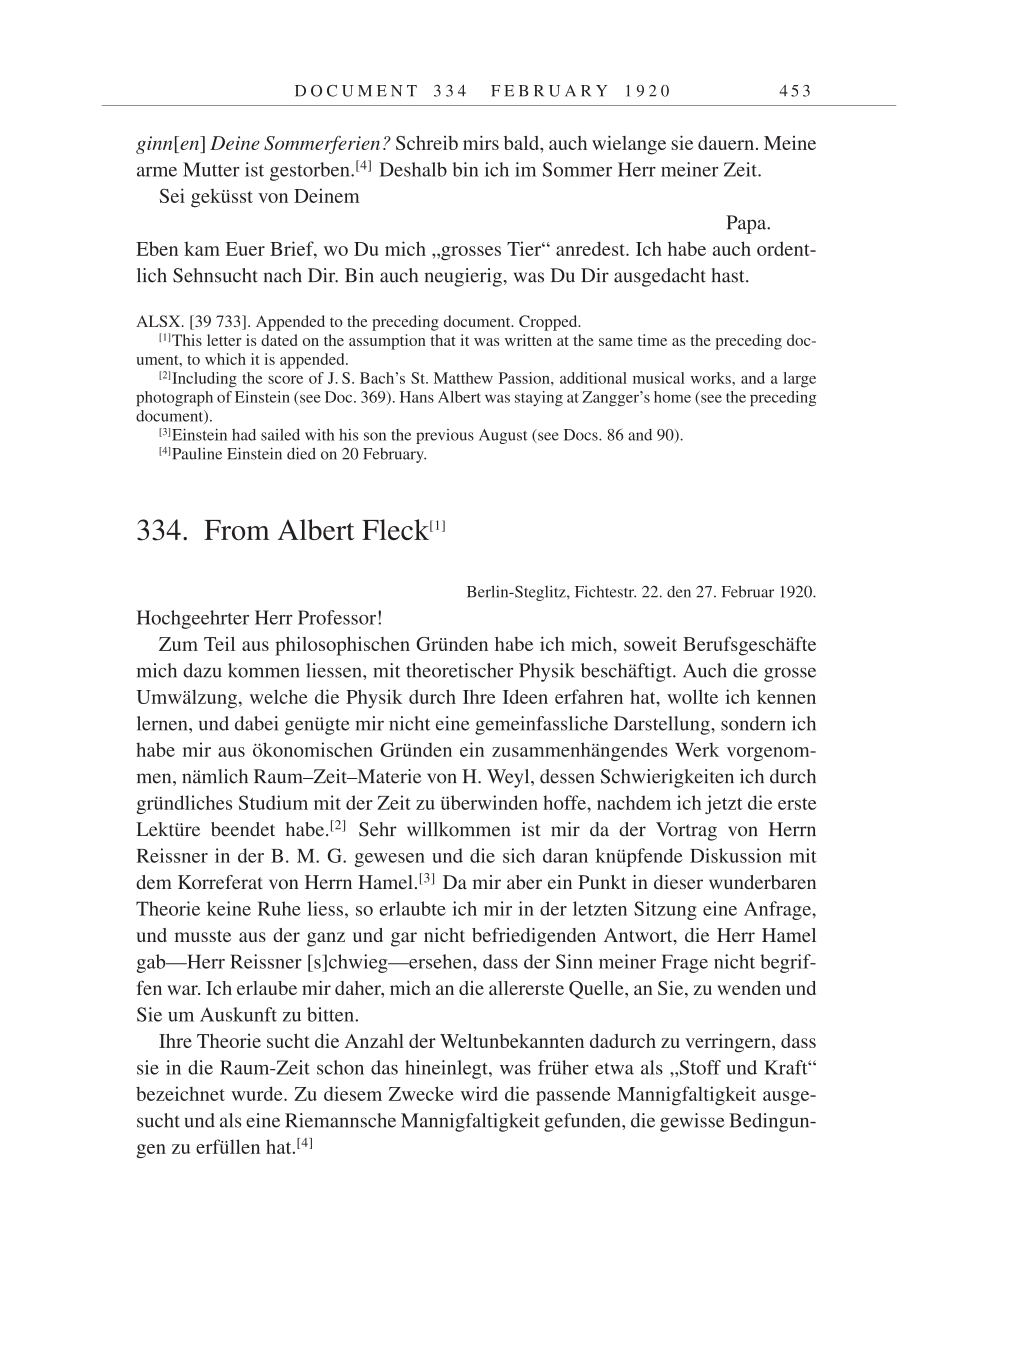 Volume 9: The Berlin Years: Correspondence January 1919-April 1920 page 453